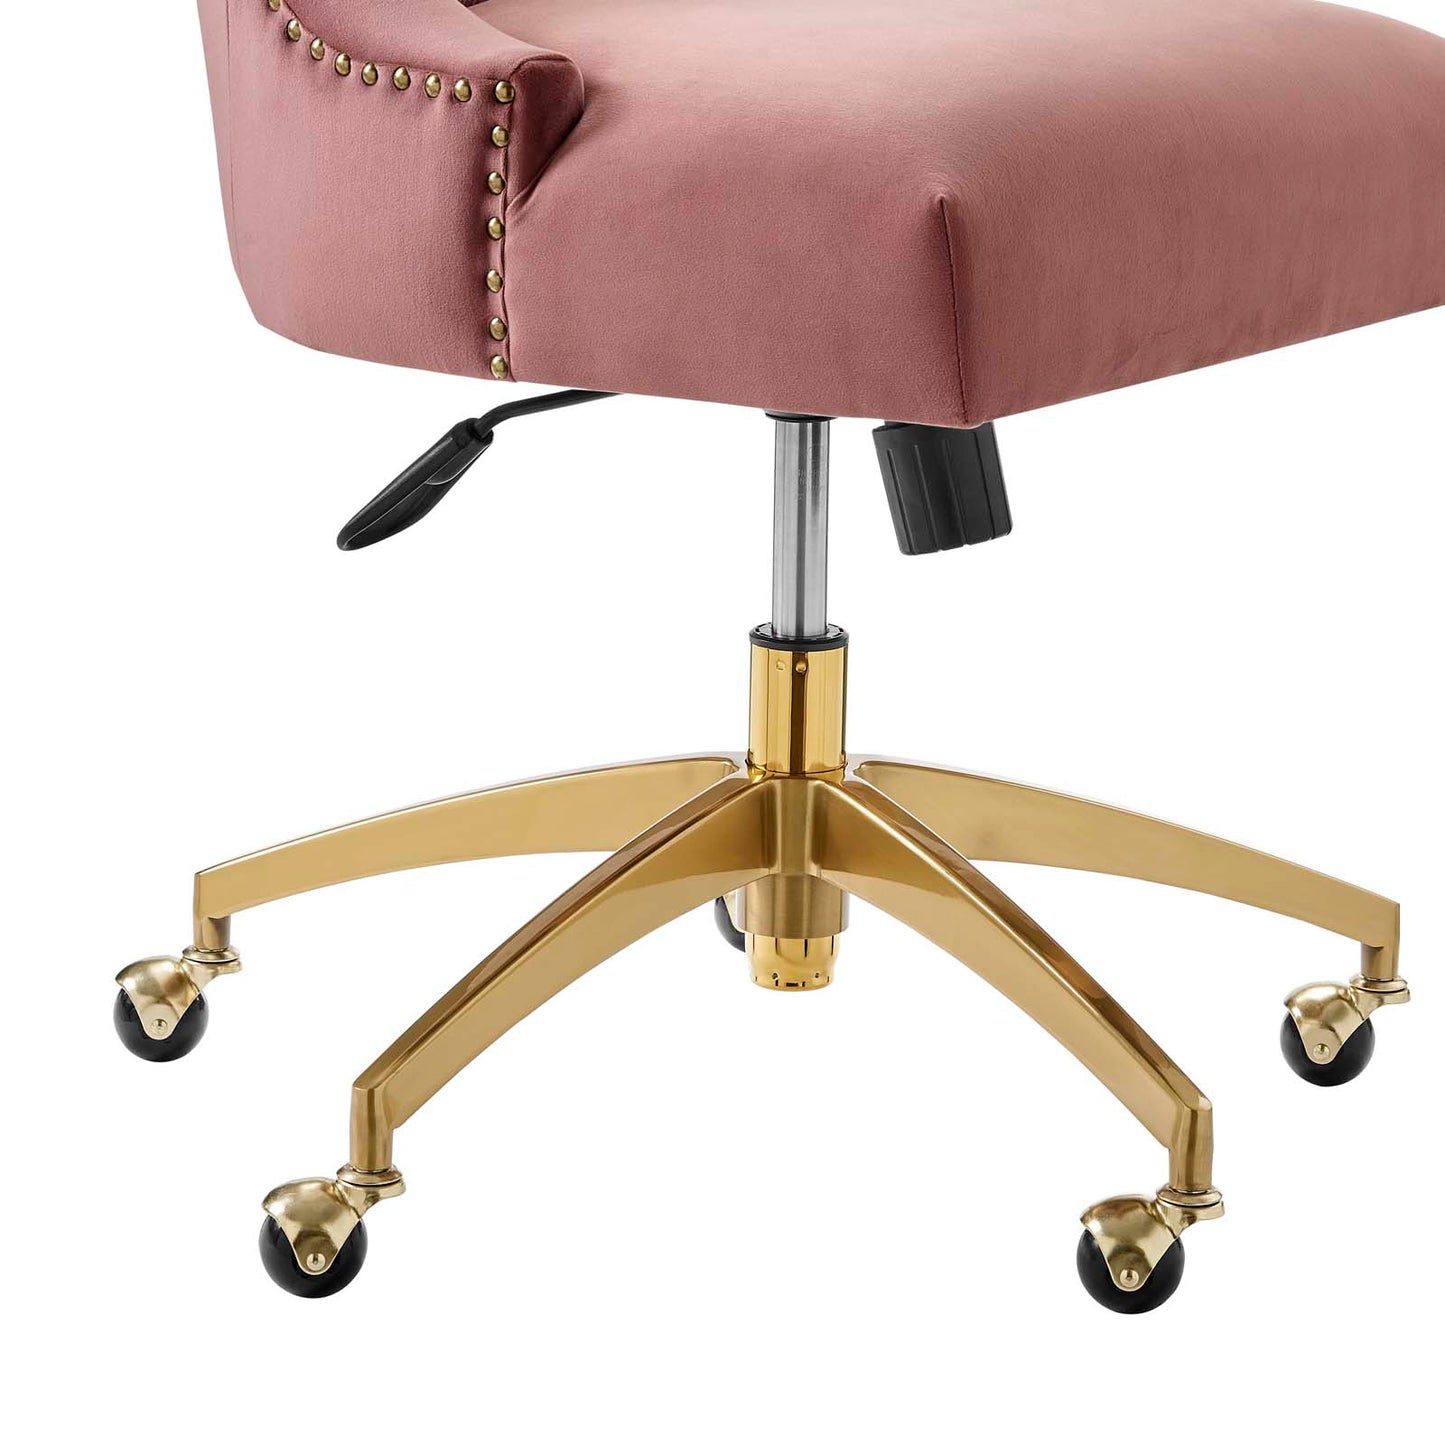 Empower Channel Tufted Performance Velvet Office Chair Gold Dusty Rose EEI-4575-GLD-DUS